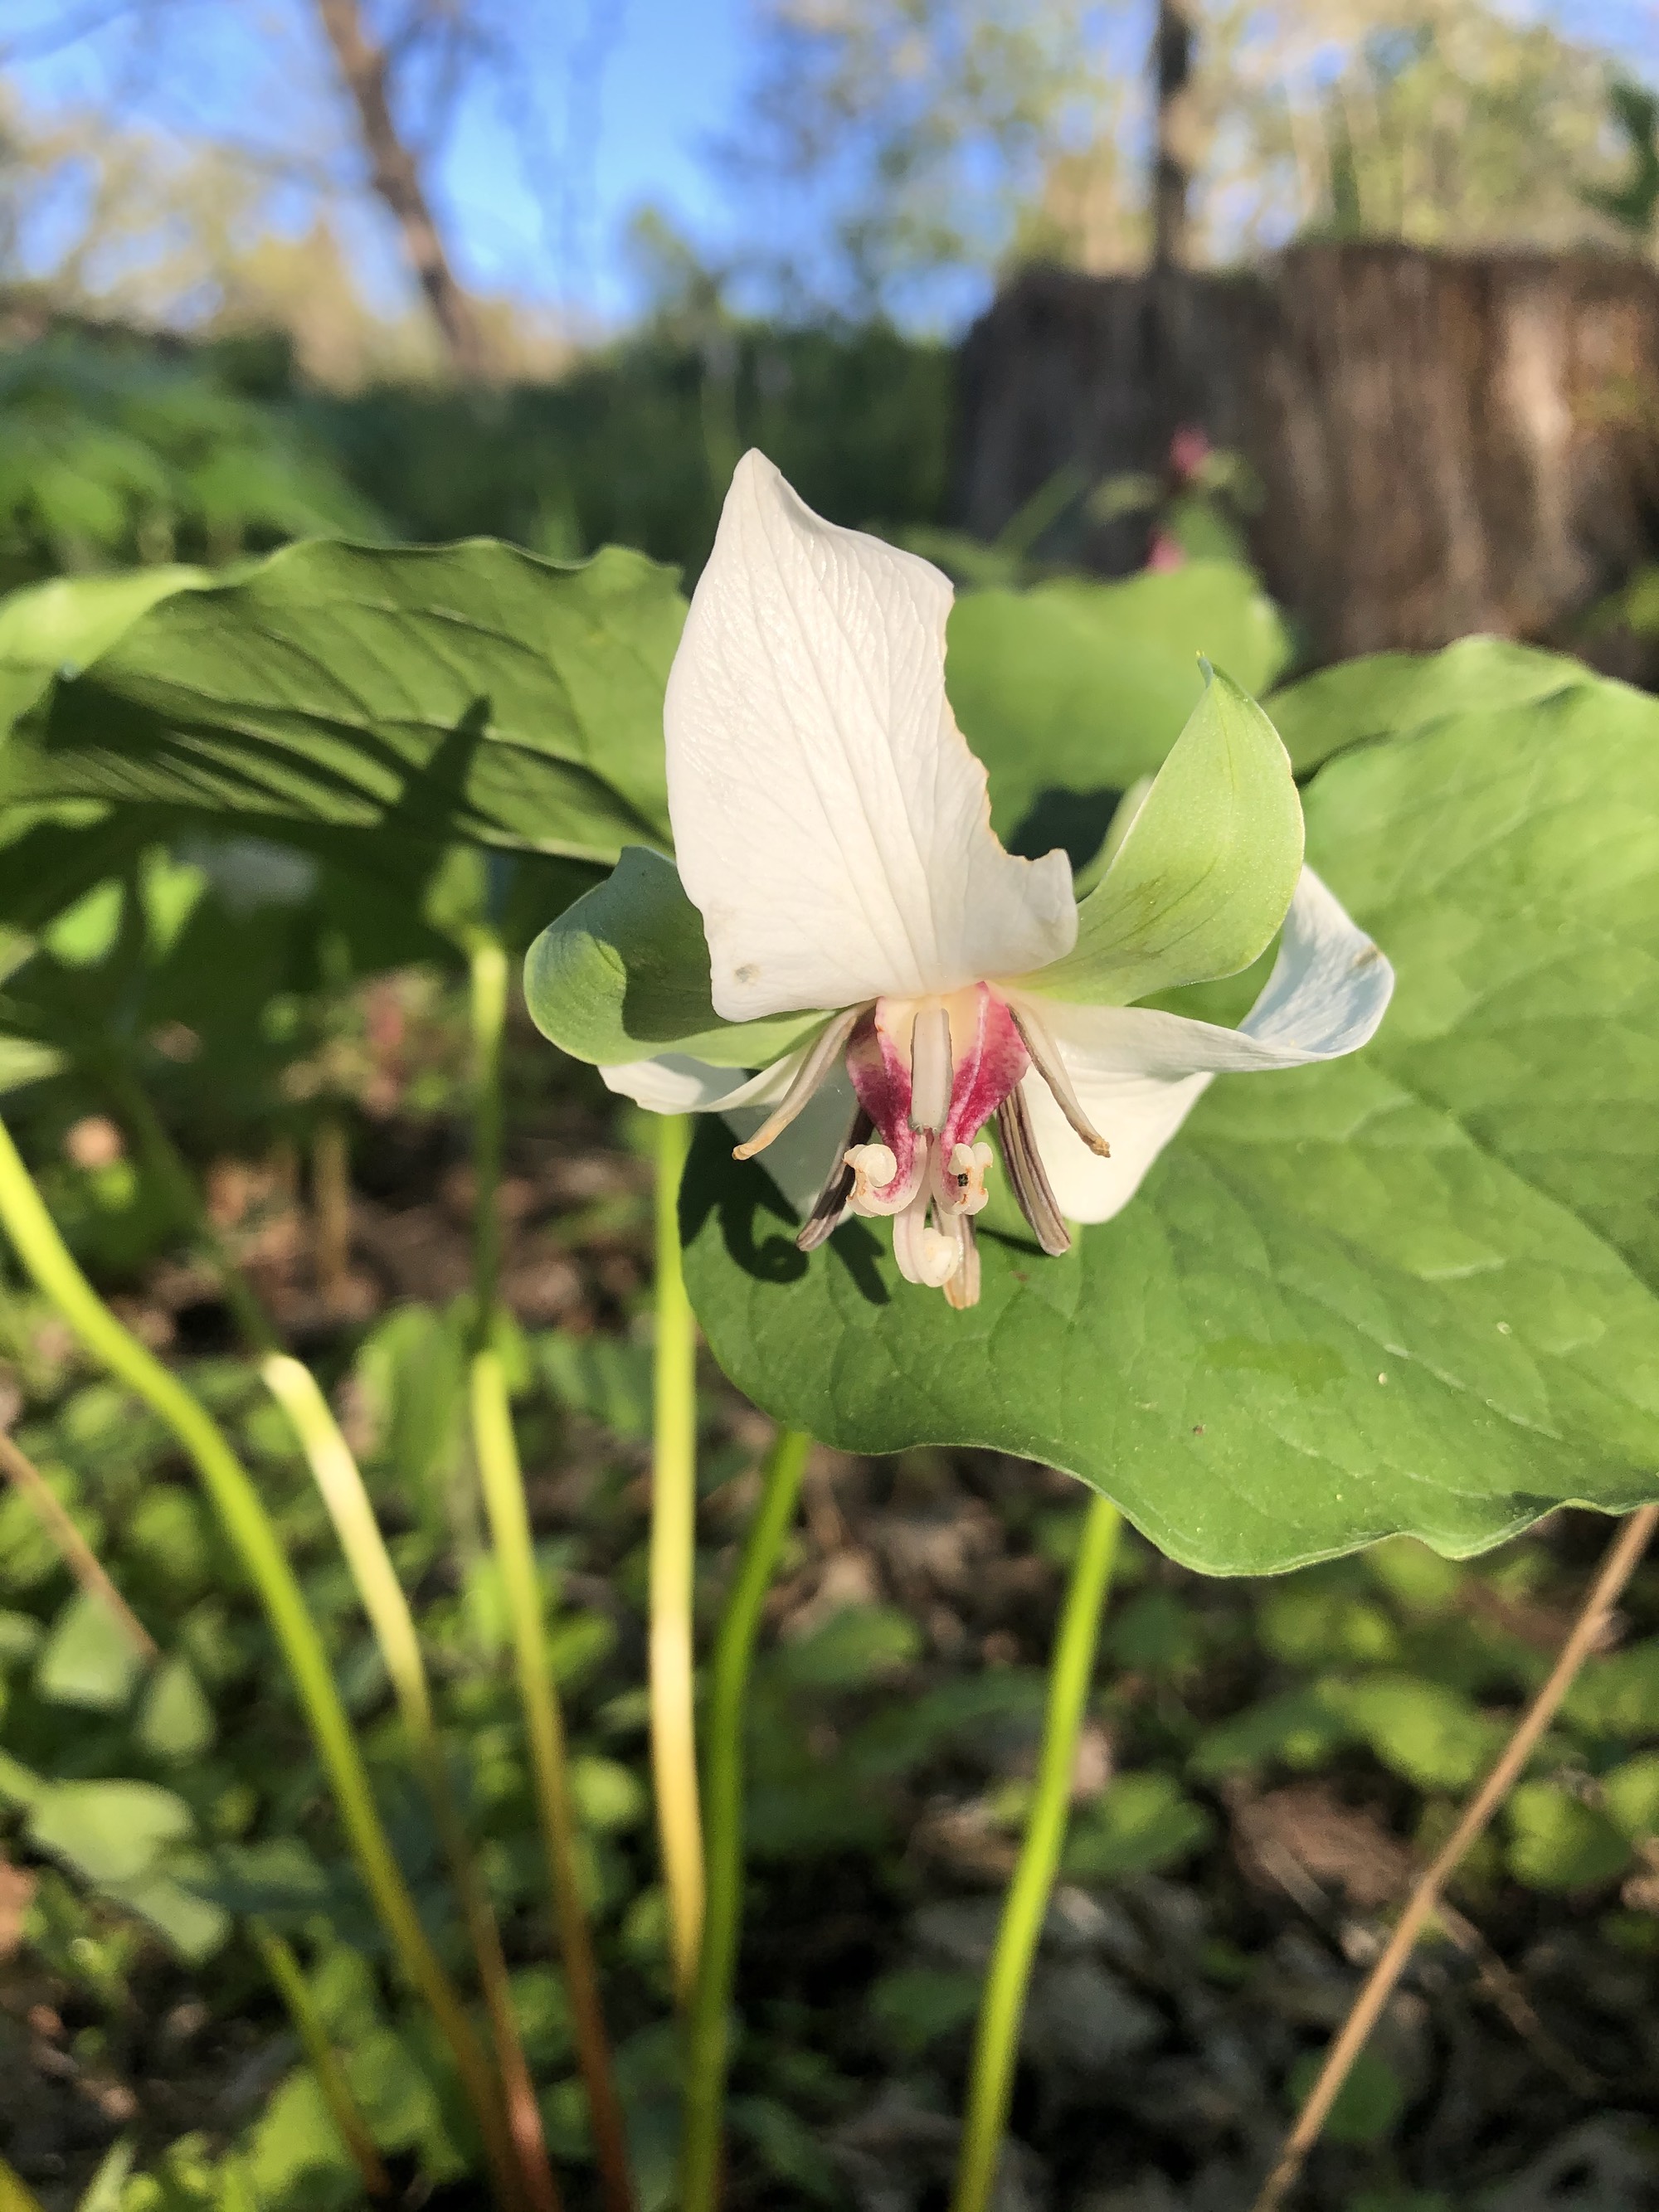 Drooping Trillium near Council Ring Spring in Madison, Wisconsin on May 11, 2021.